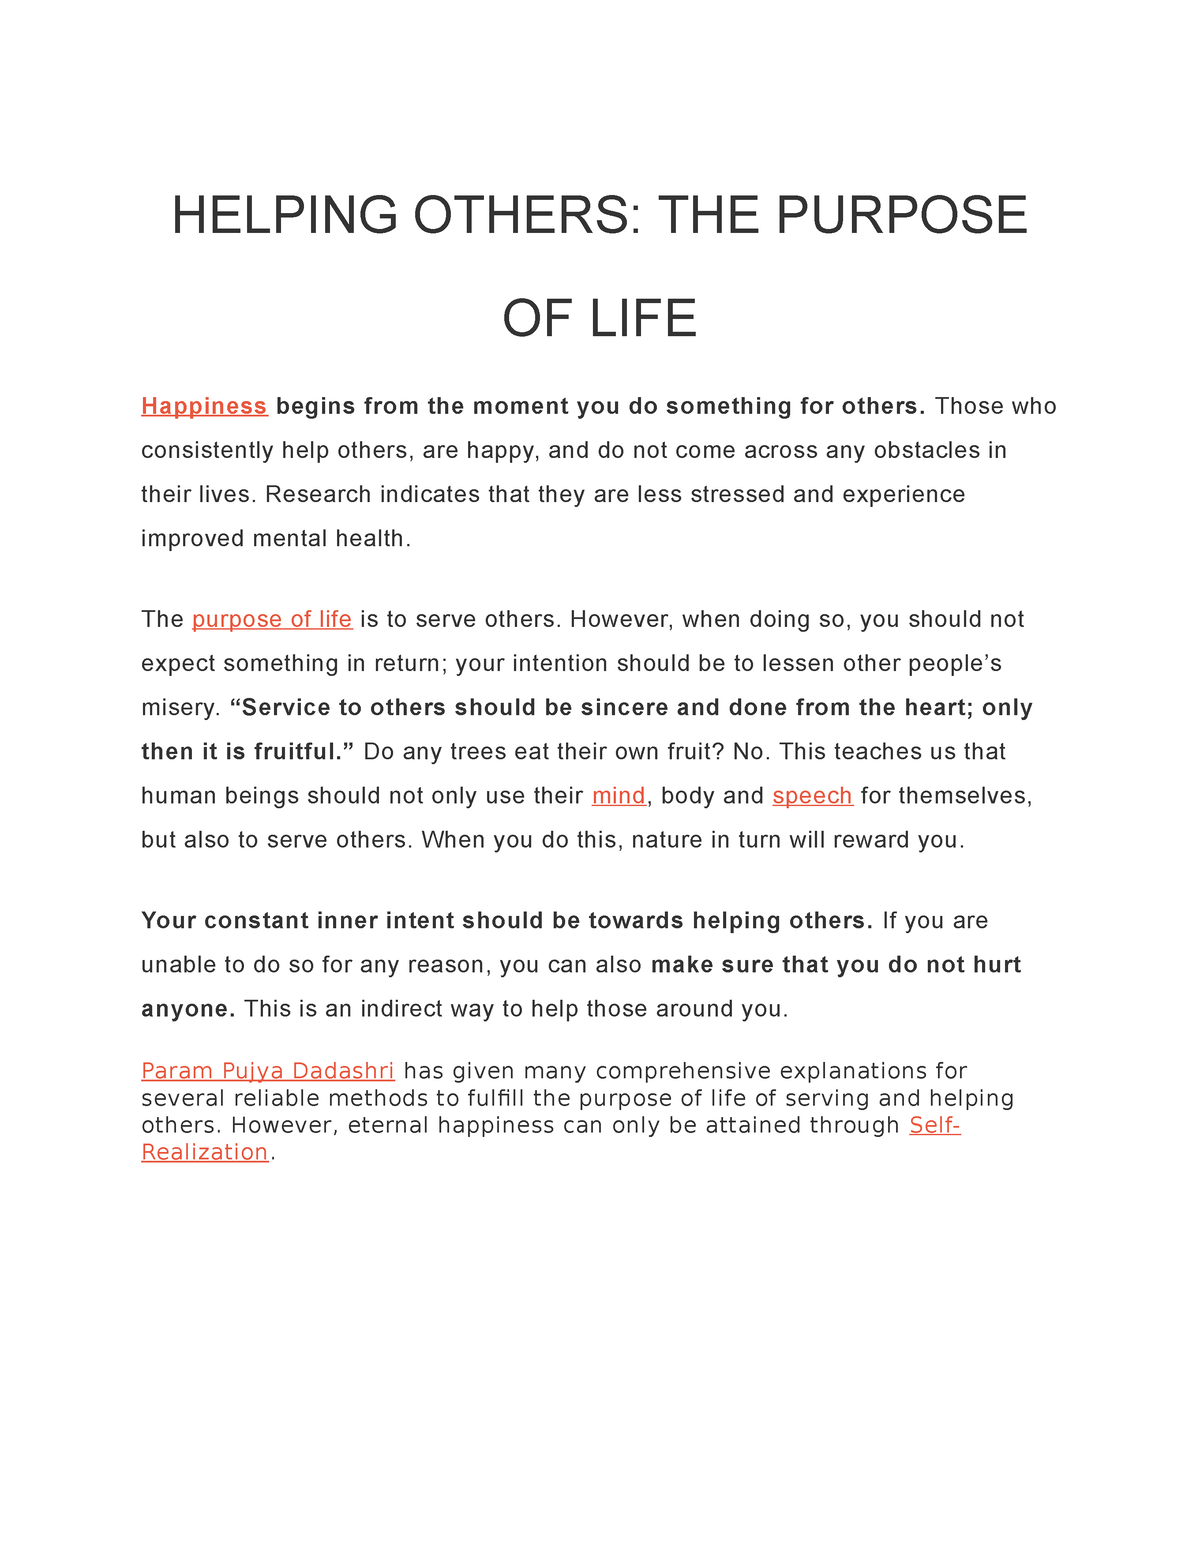 essay on importance of helping others